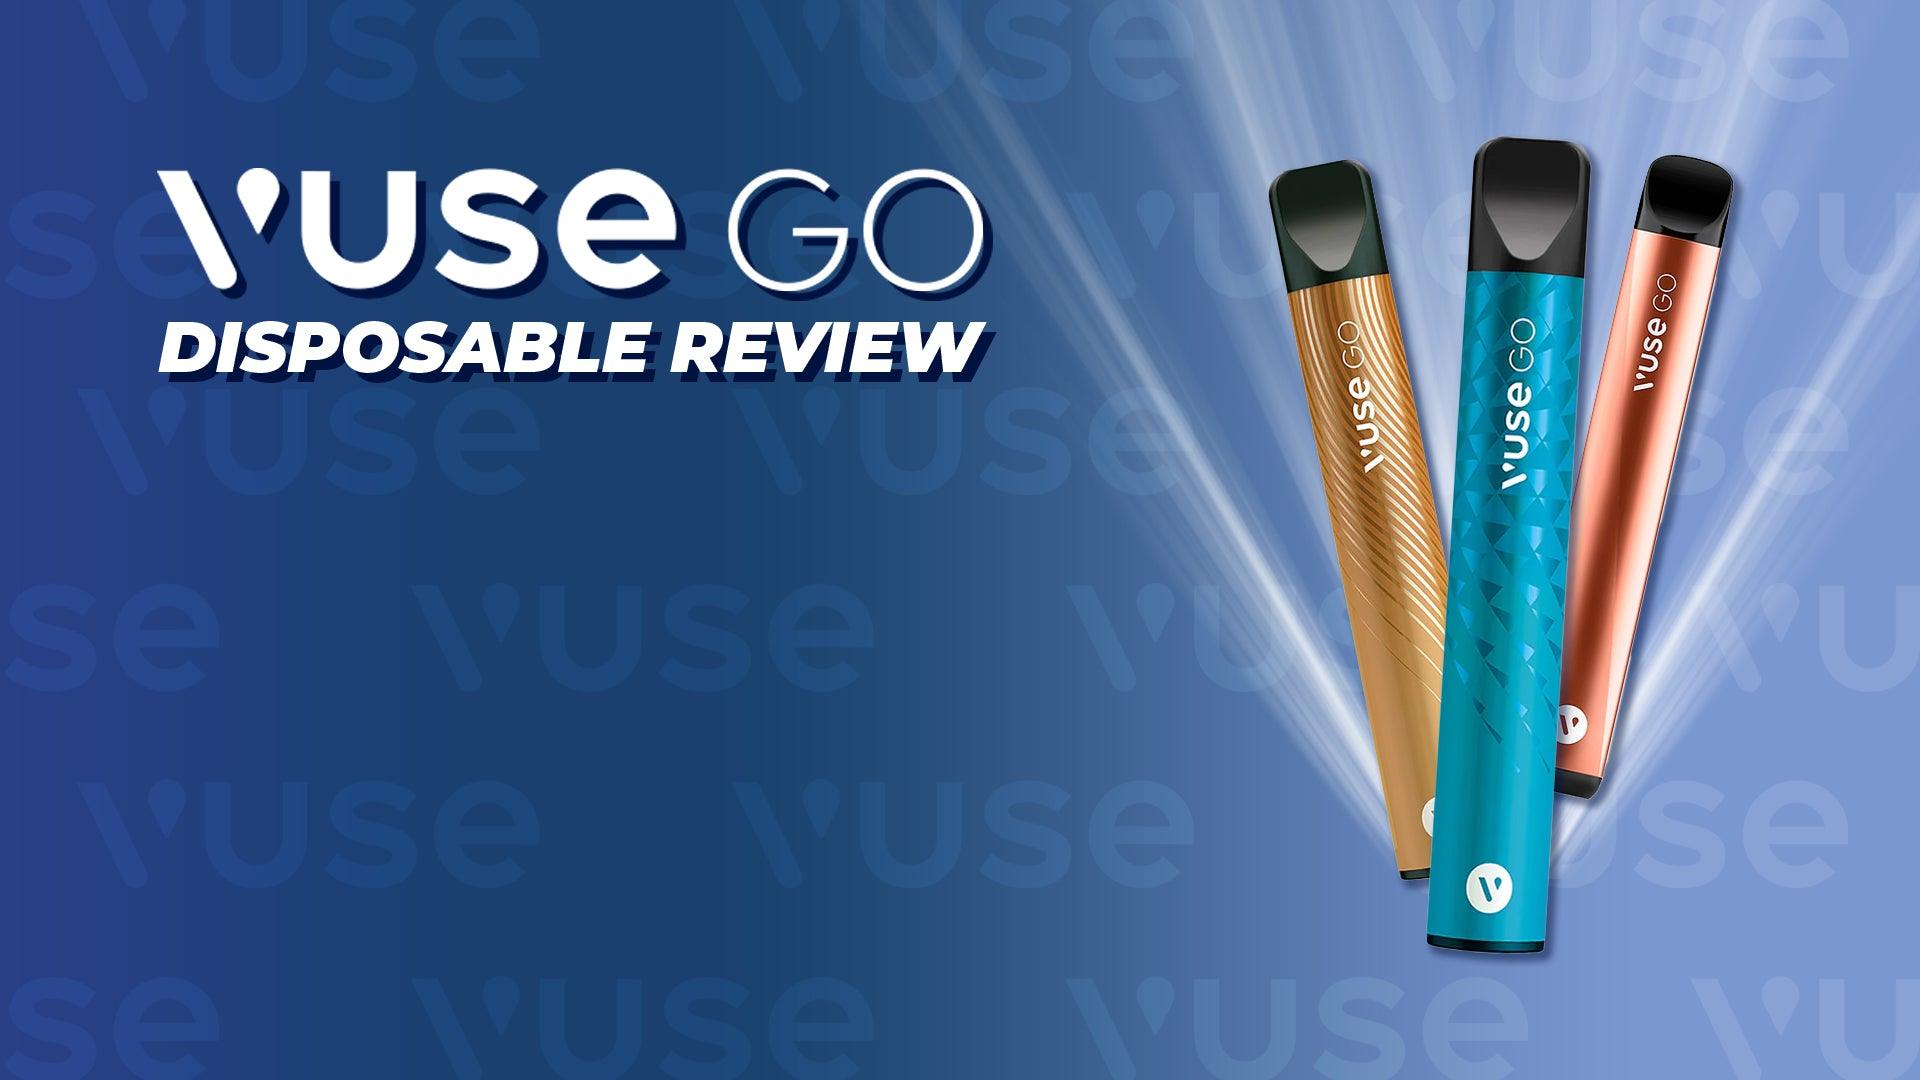 Vuse Go Review - Brand:Vuse, Category:Vape Kits, Sub Category:Disposables